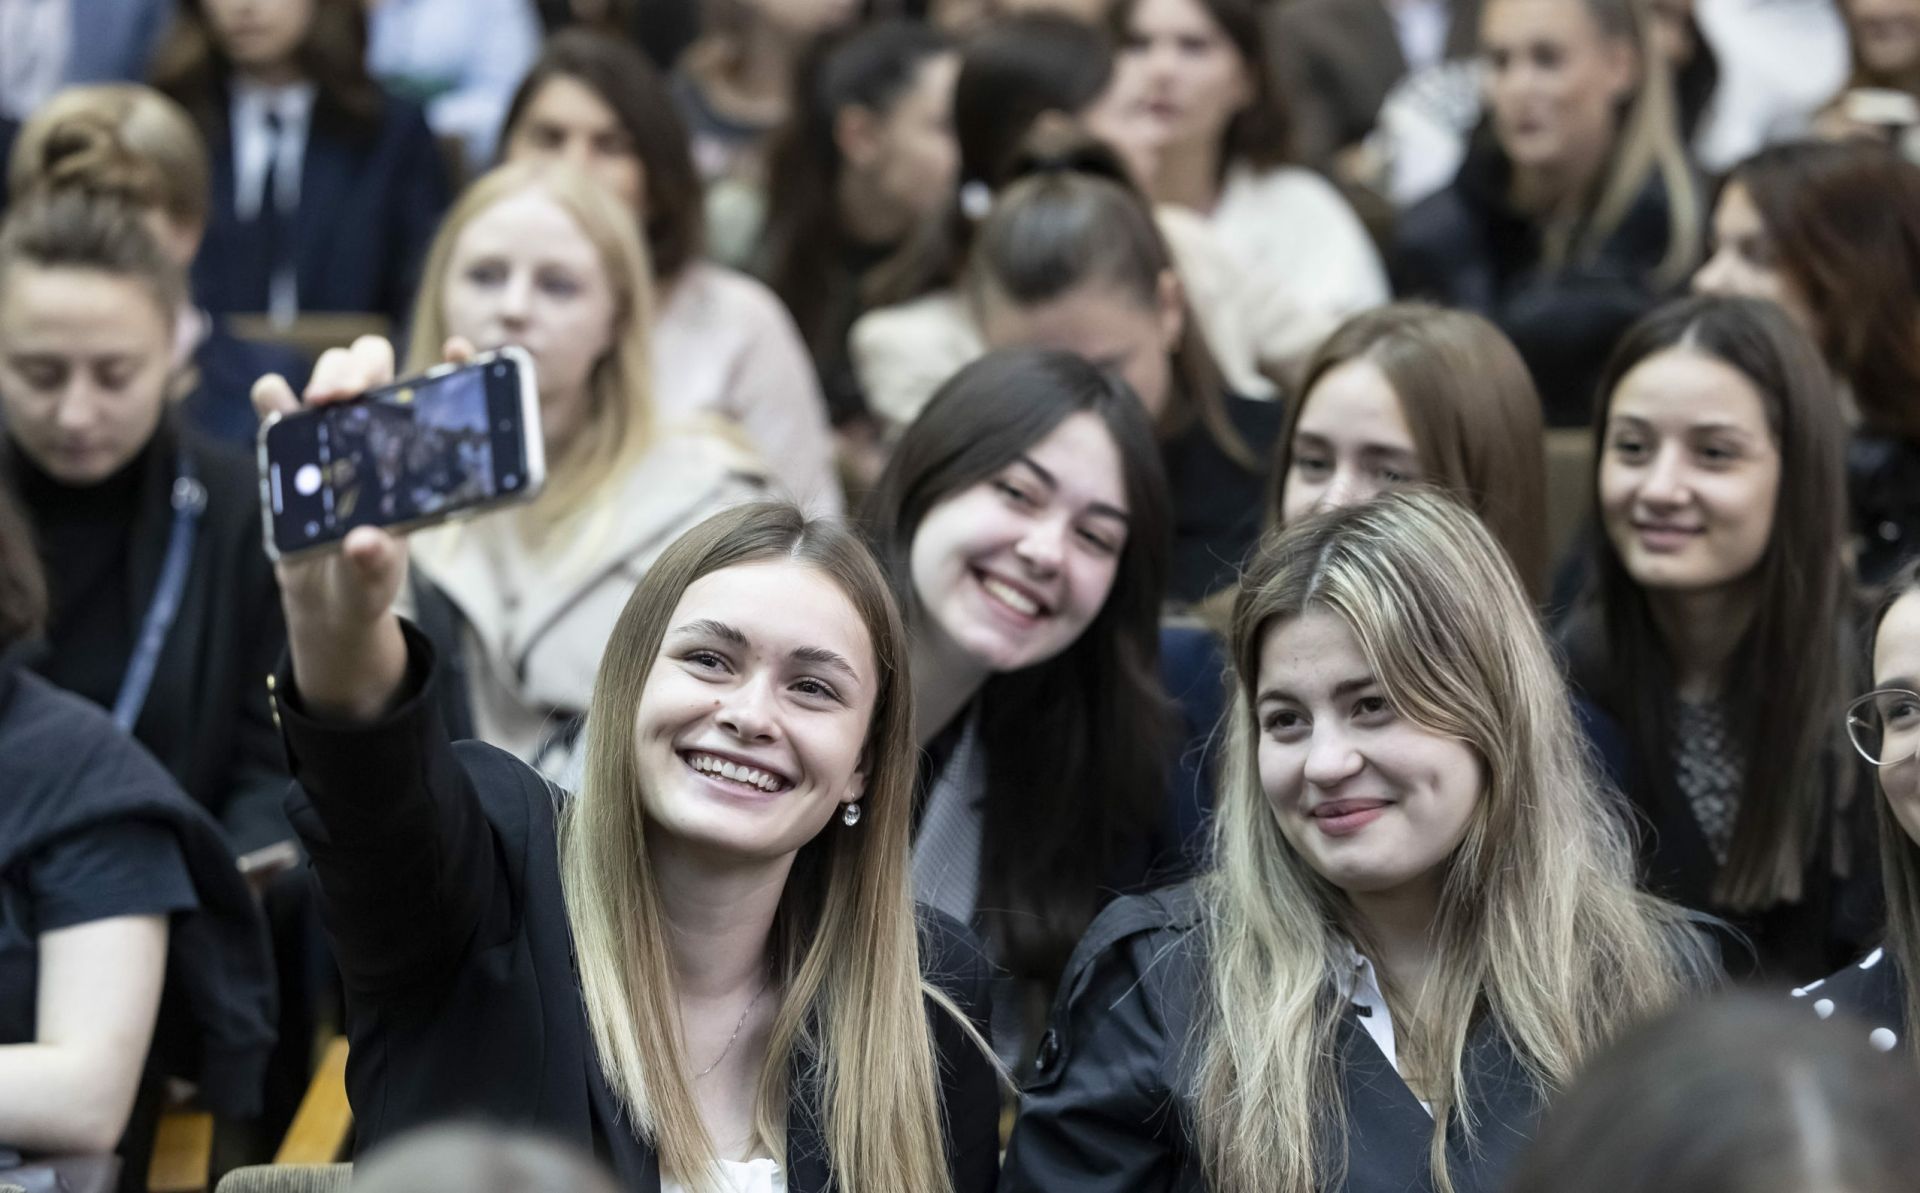 EU4Youth regional initiative to foster youth empowerment and social enterprise launched in Chisinau